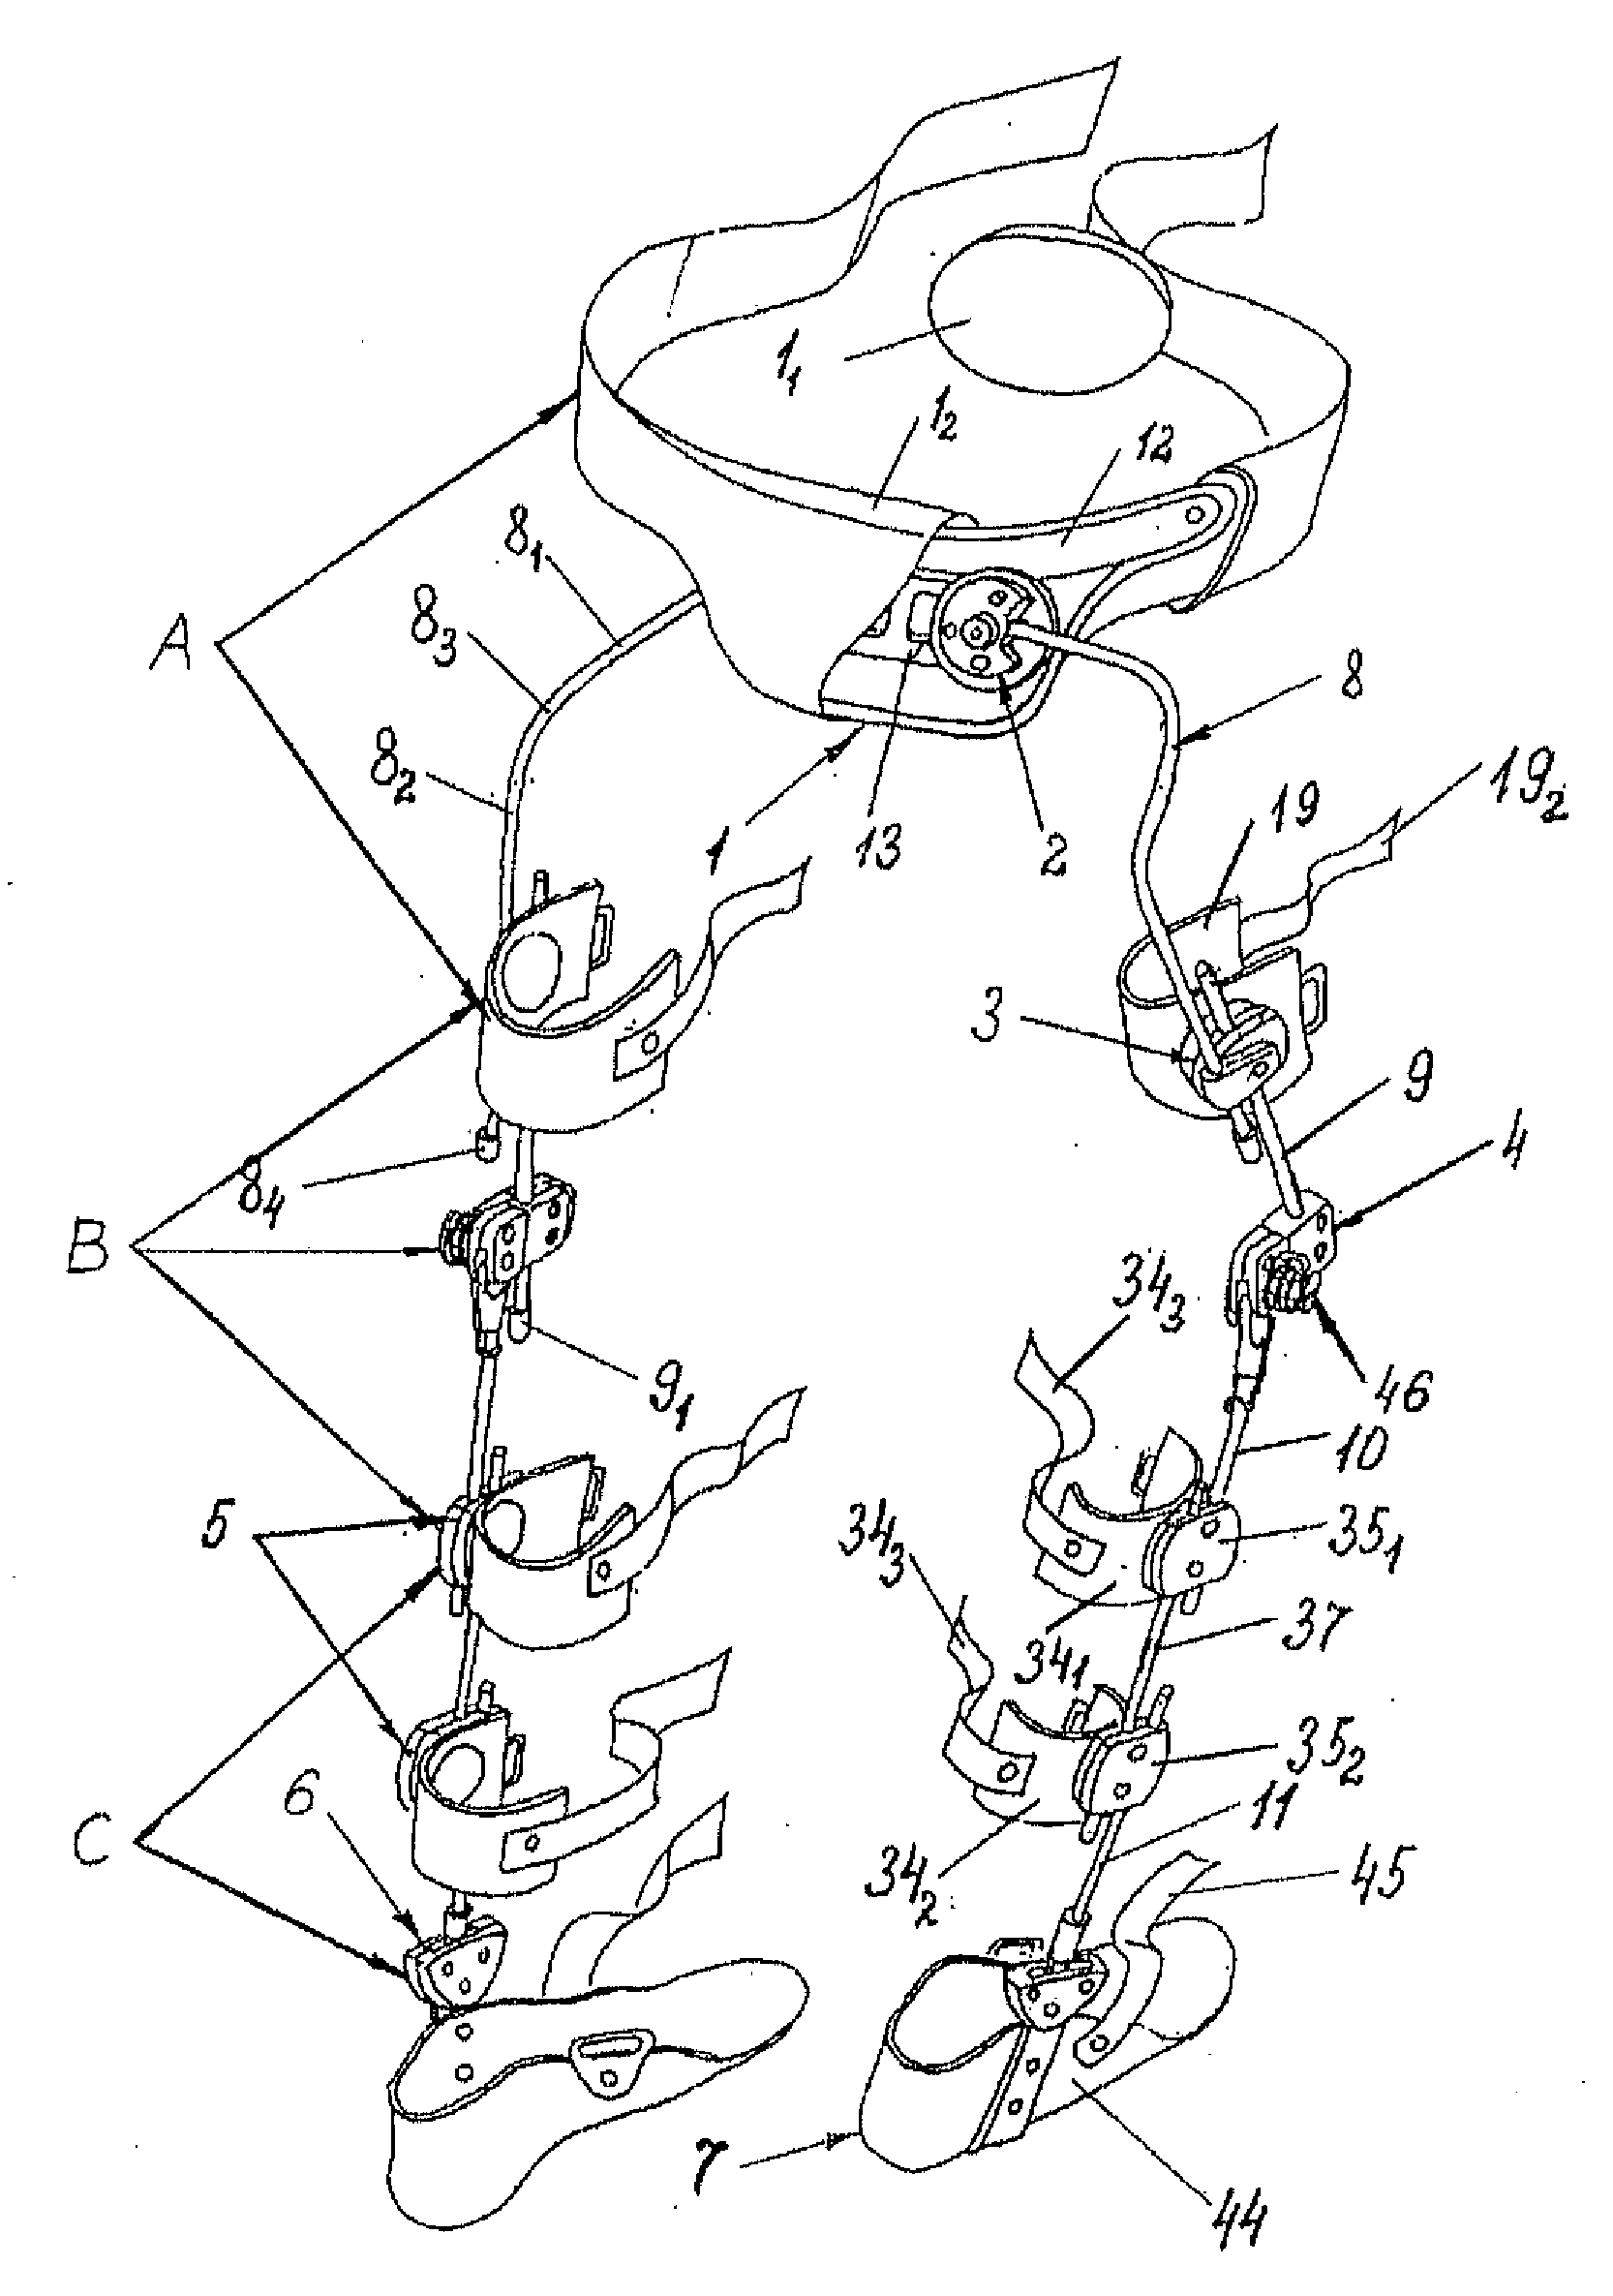 Method for correcting pathological configurations of segments of the lower extremities and device for realizing same